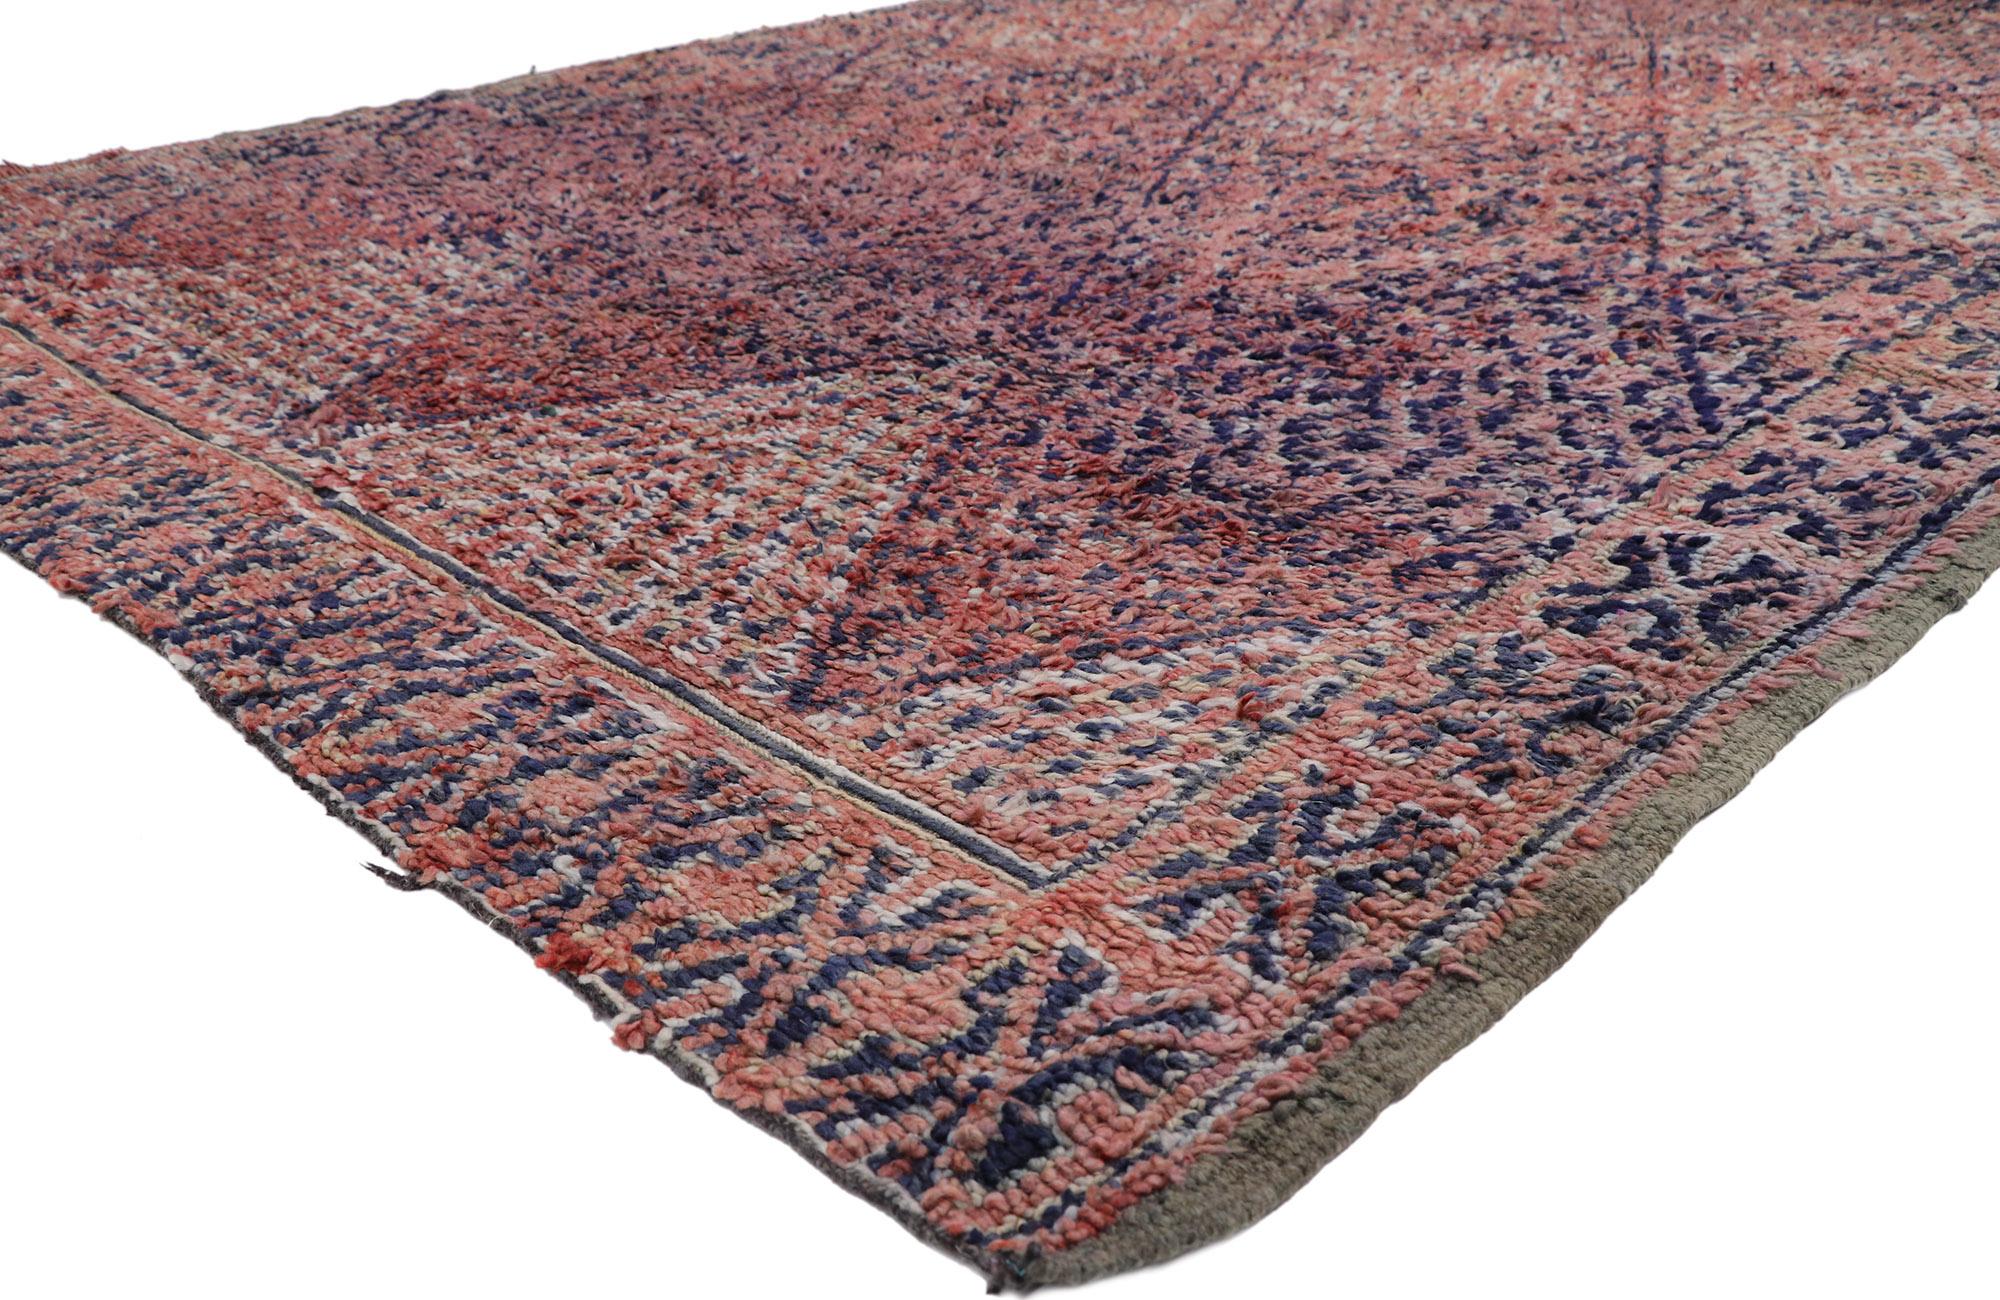 21447 Vintage Berber Beni M'Guild Zayane Moroccan rug with Bohemian Style 07'01 x 10'03. With its simplicity, plush pile and bohemian style, this hand knotted wool vintage Beni M'Guild Zayane Moroccan rug is a captivating vision of woven beauty. The